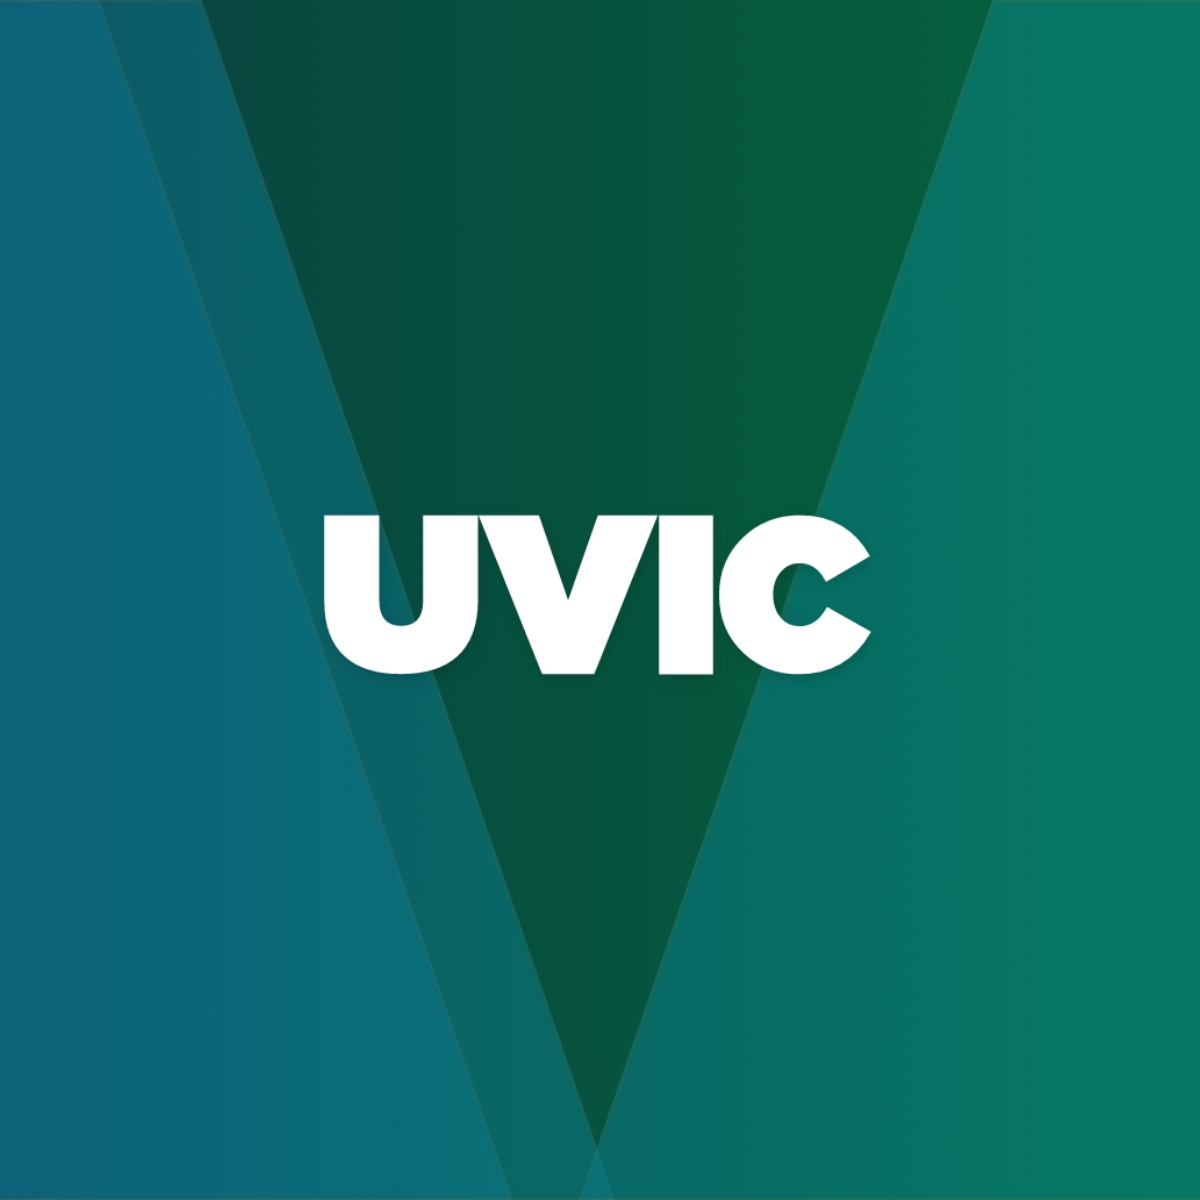 uvic feature2 - Purica